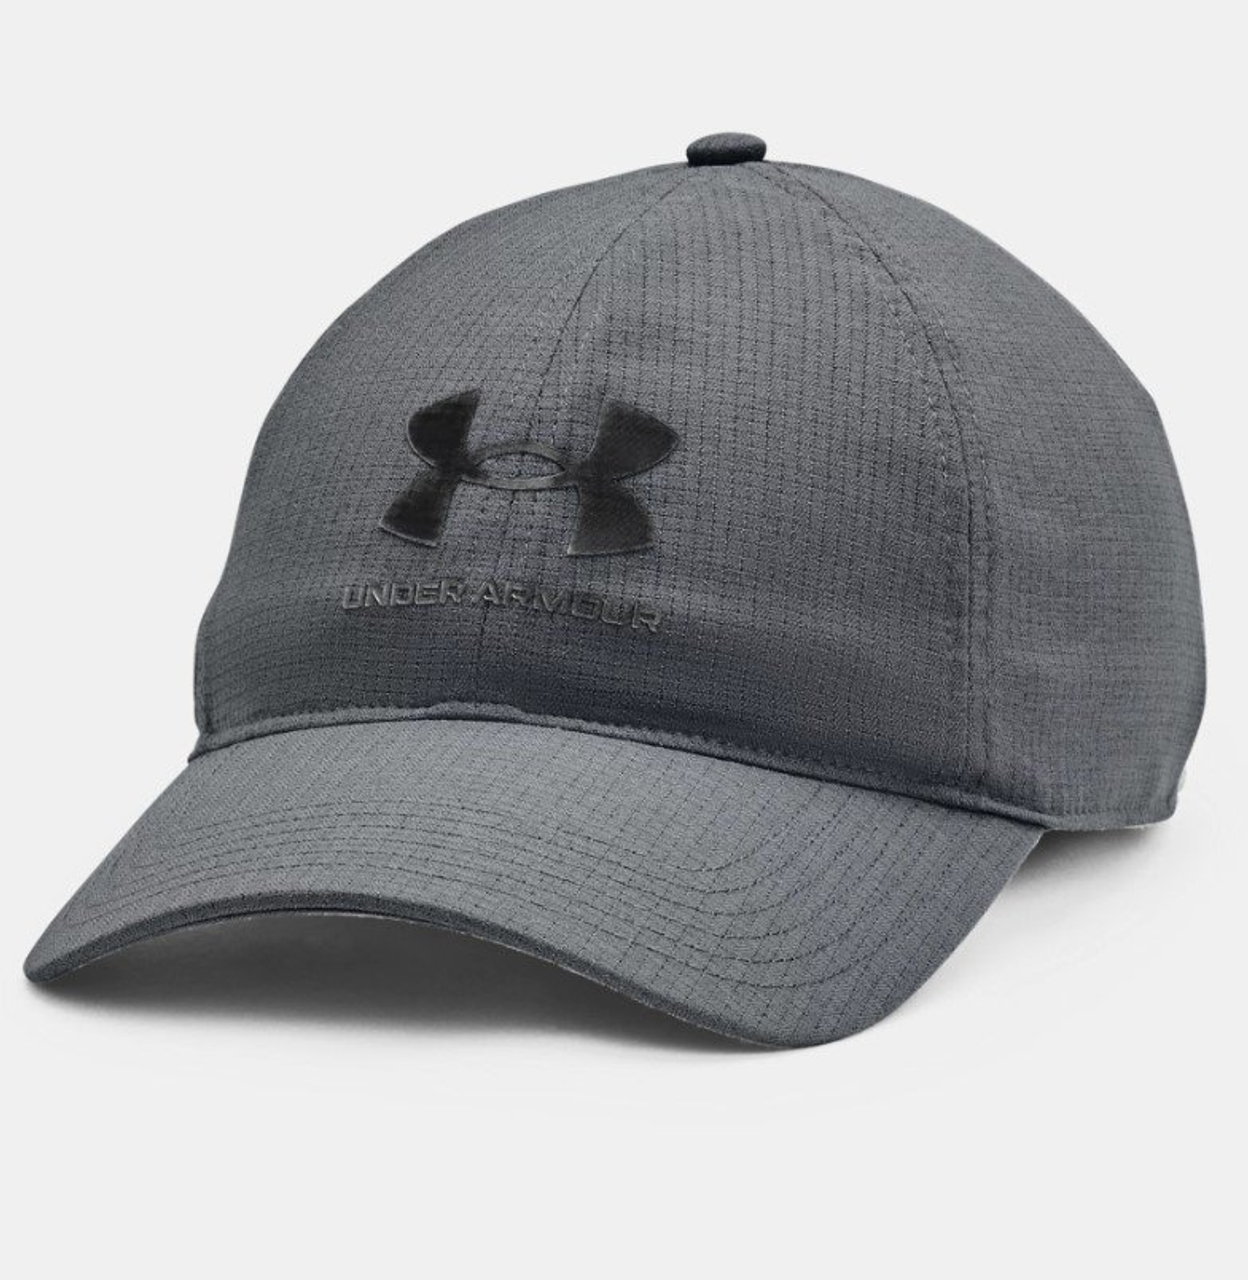 Under Armour Men's Iso-Chill Armourvent Fish Adjustable Hat